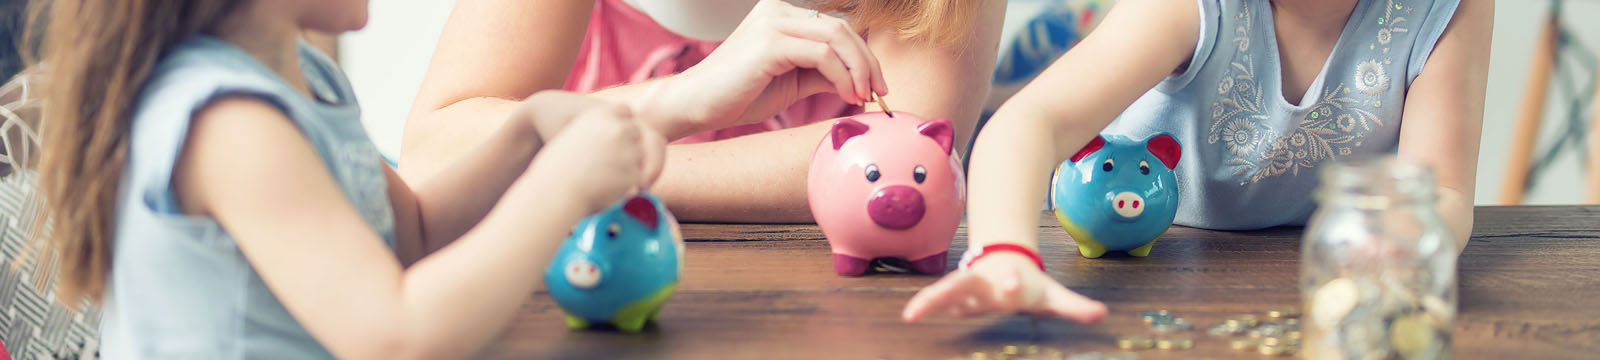 woman and two children's hands putting coins into piggy bank